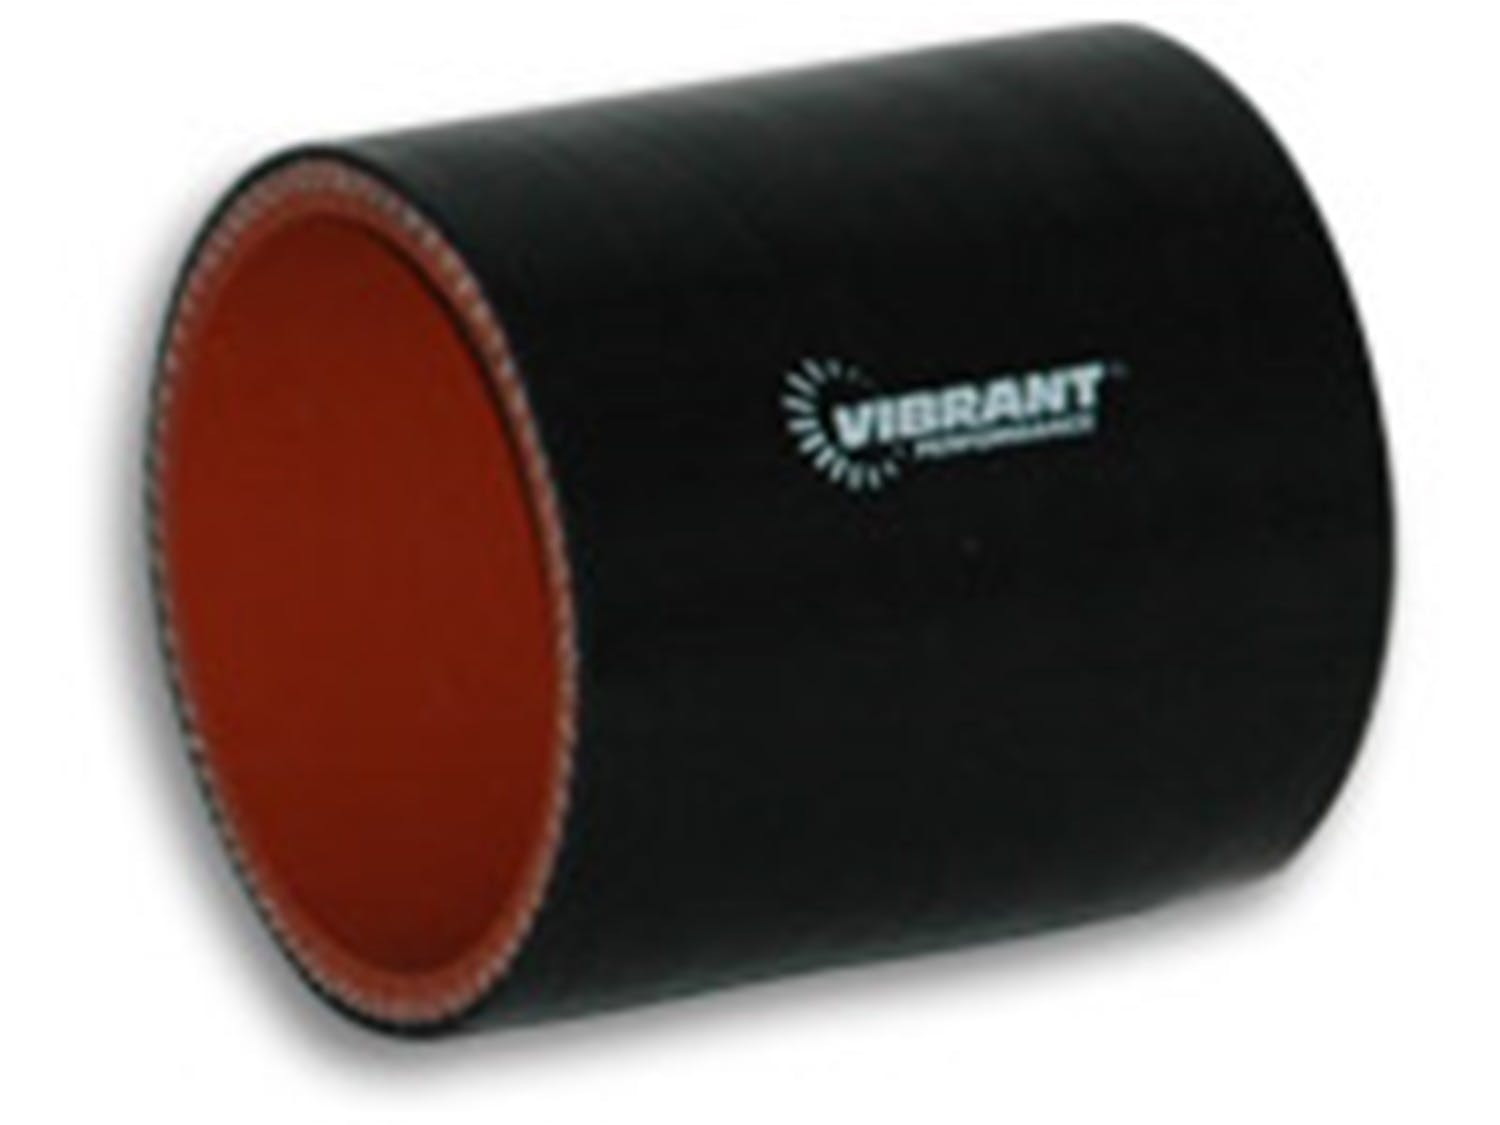 Vibrant Performance 2706 4 Ply Silicone Sleeve, 2 inch I.D. x 3 inch Long - Black